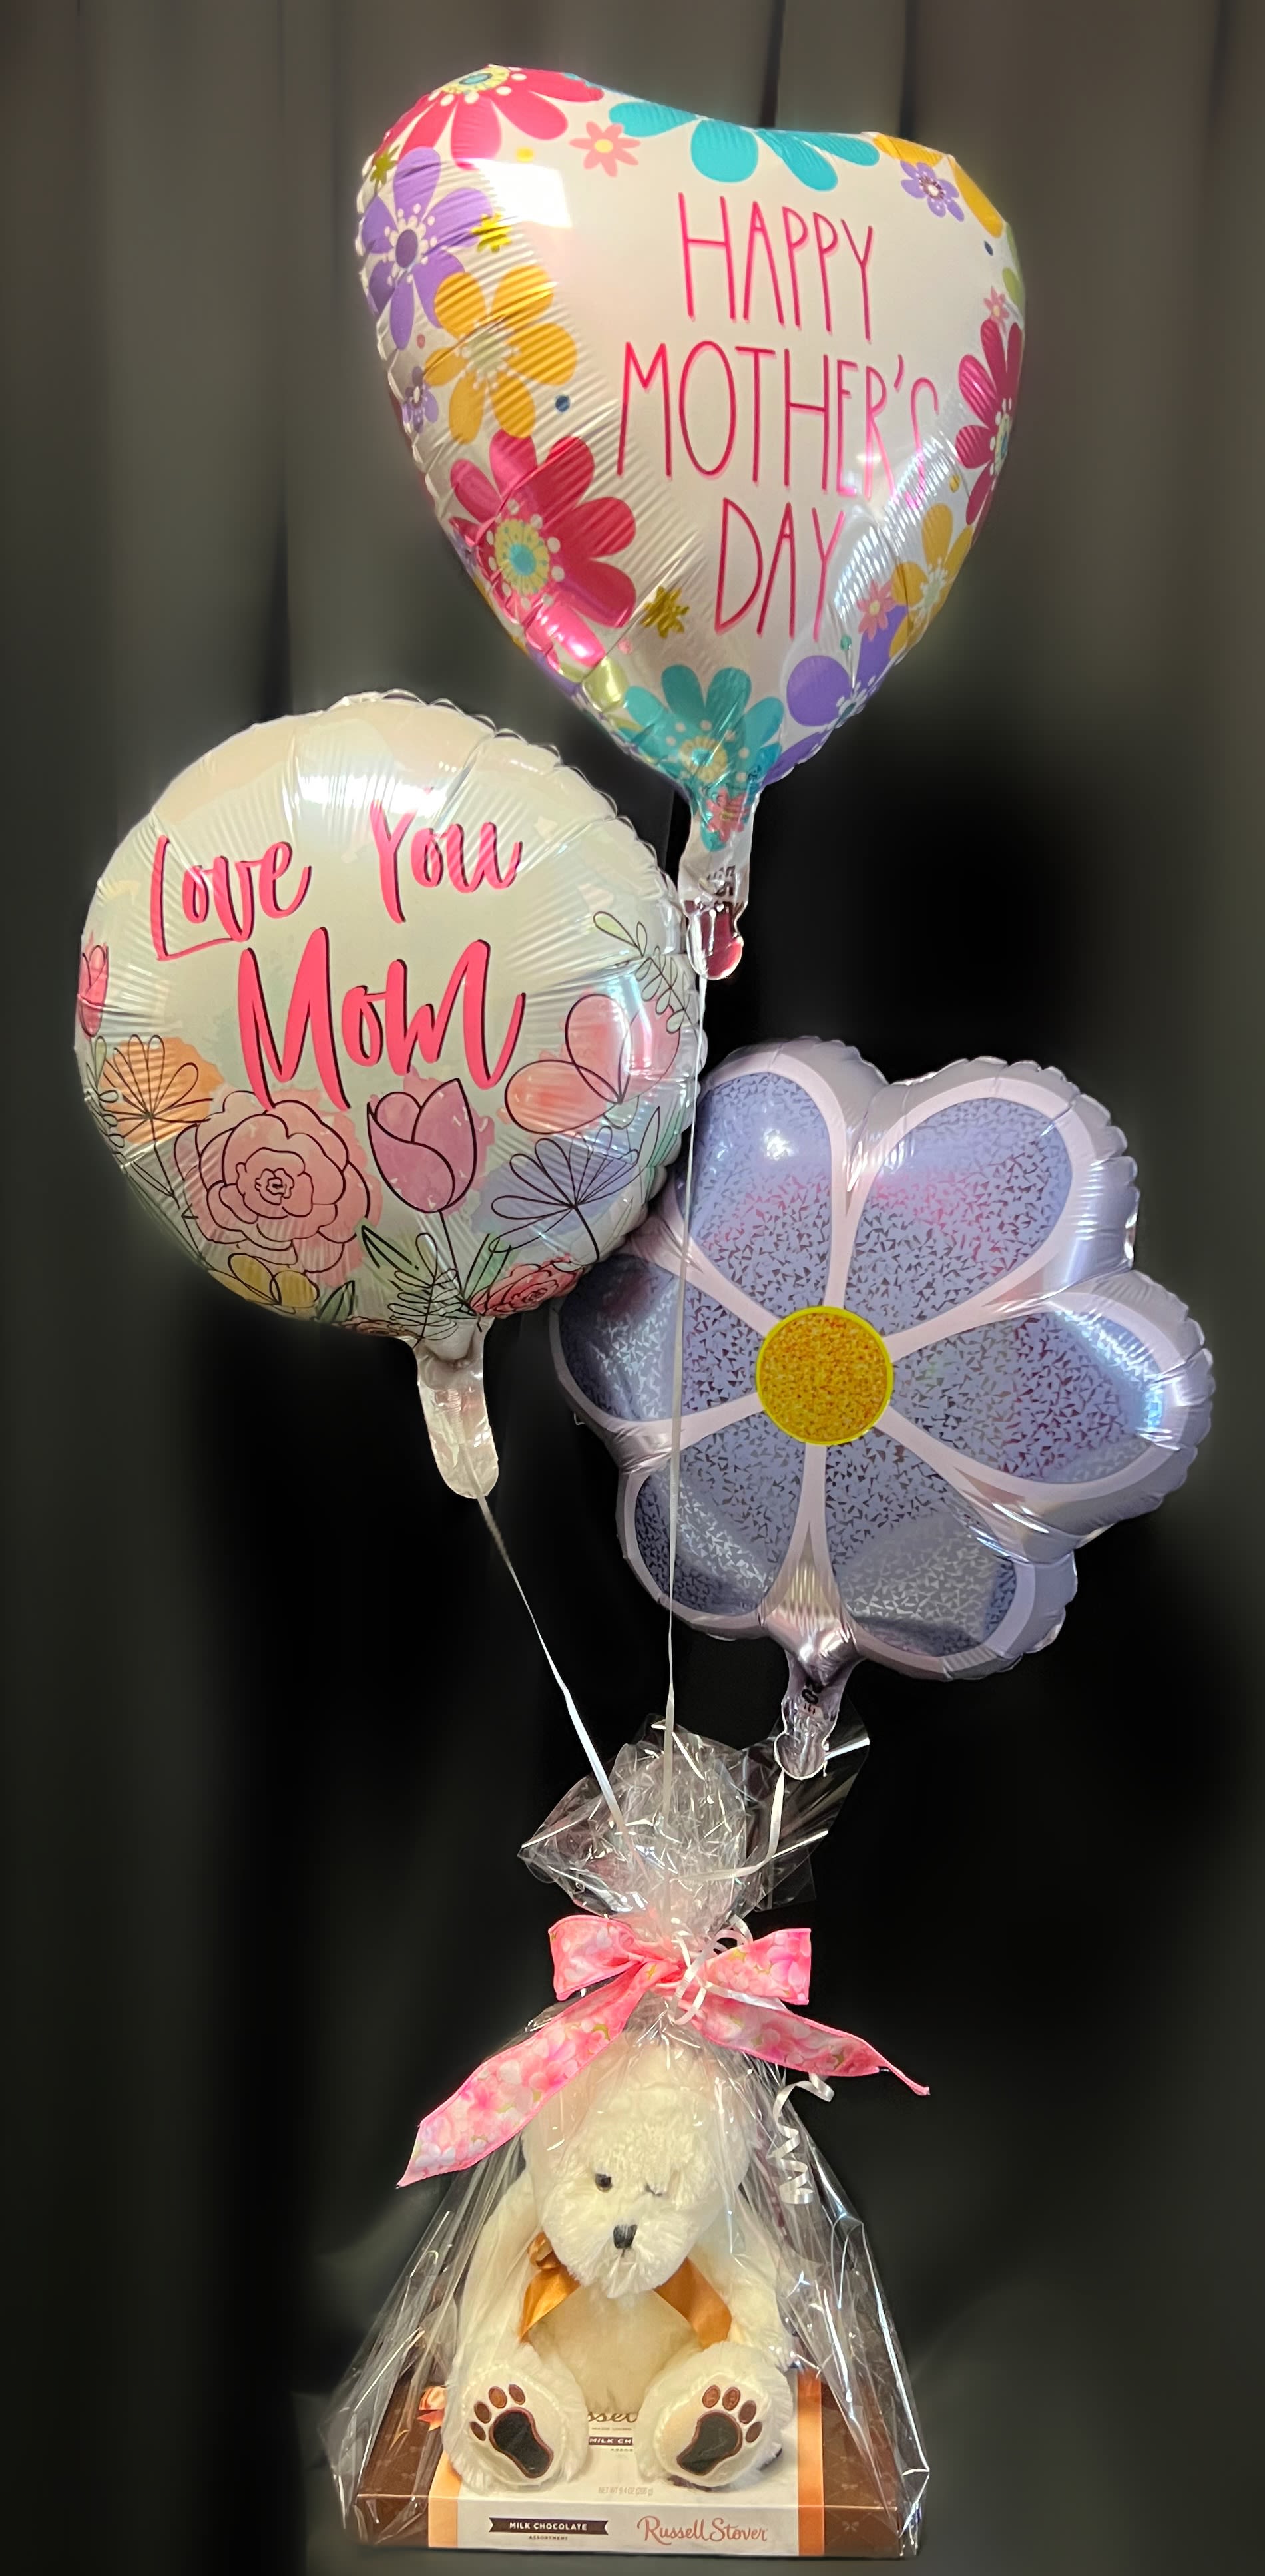 MD BUNDLE #2 - BEAR WITH CHOCOLATES AND 3 MYLAR BALLOONS